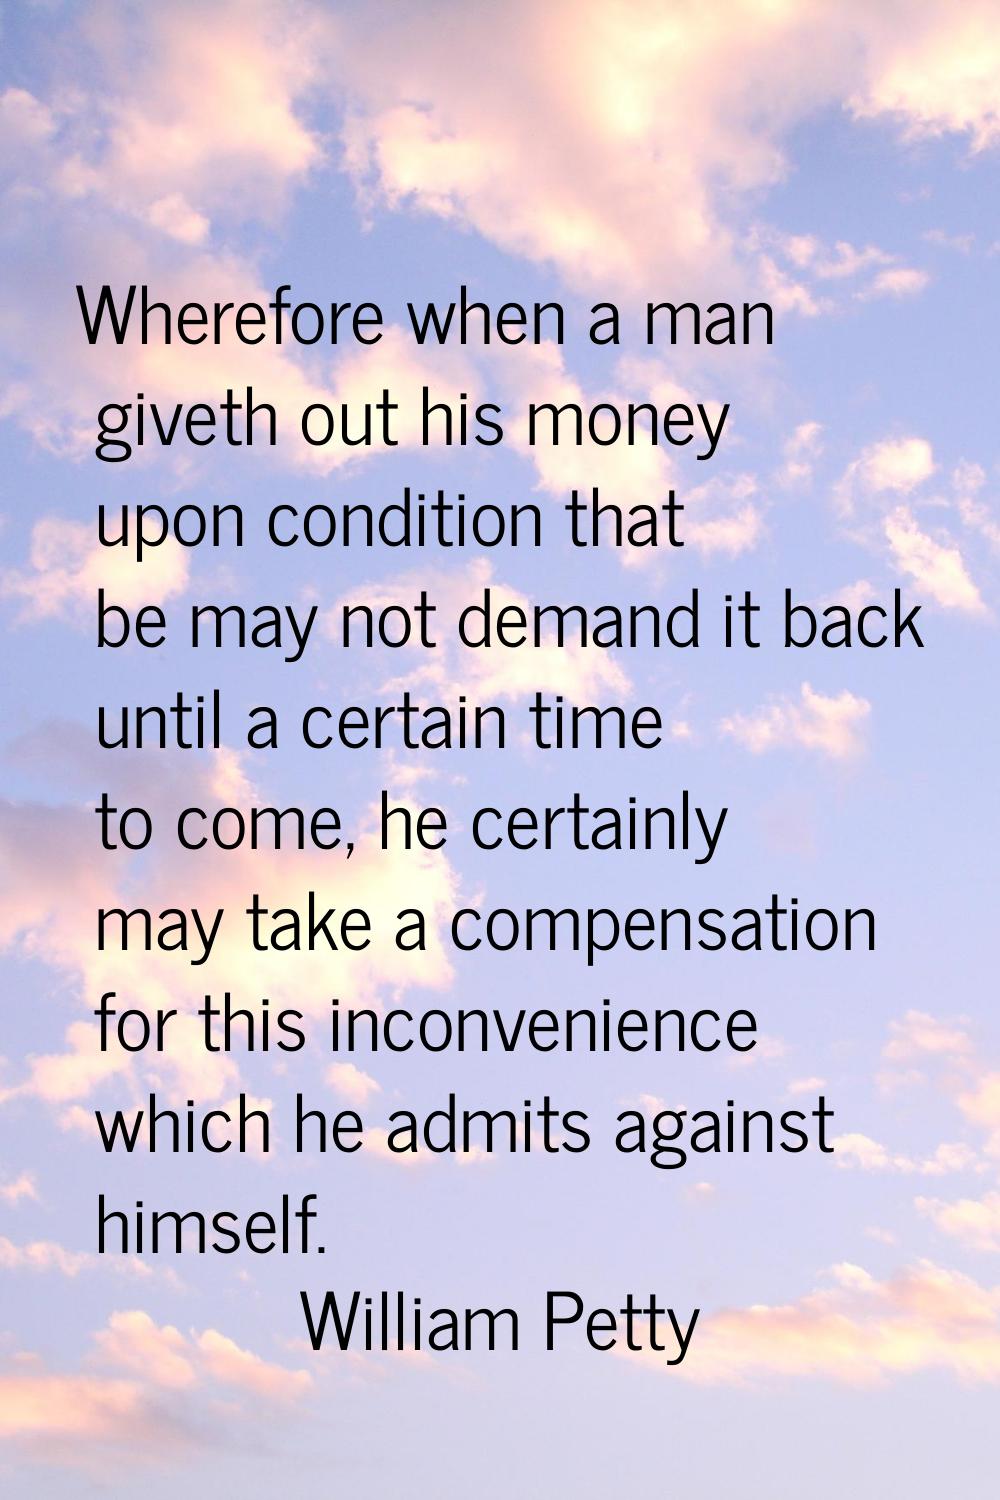 Wherefore when a man giveth out his money upon condition that be may not demand it back until a cer